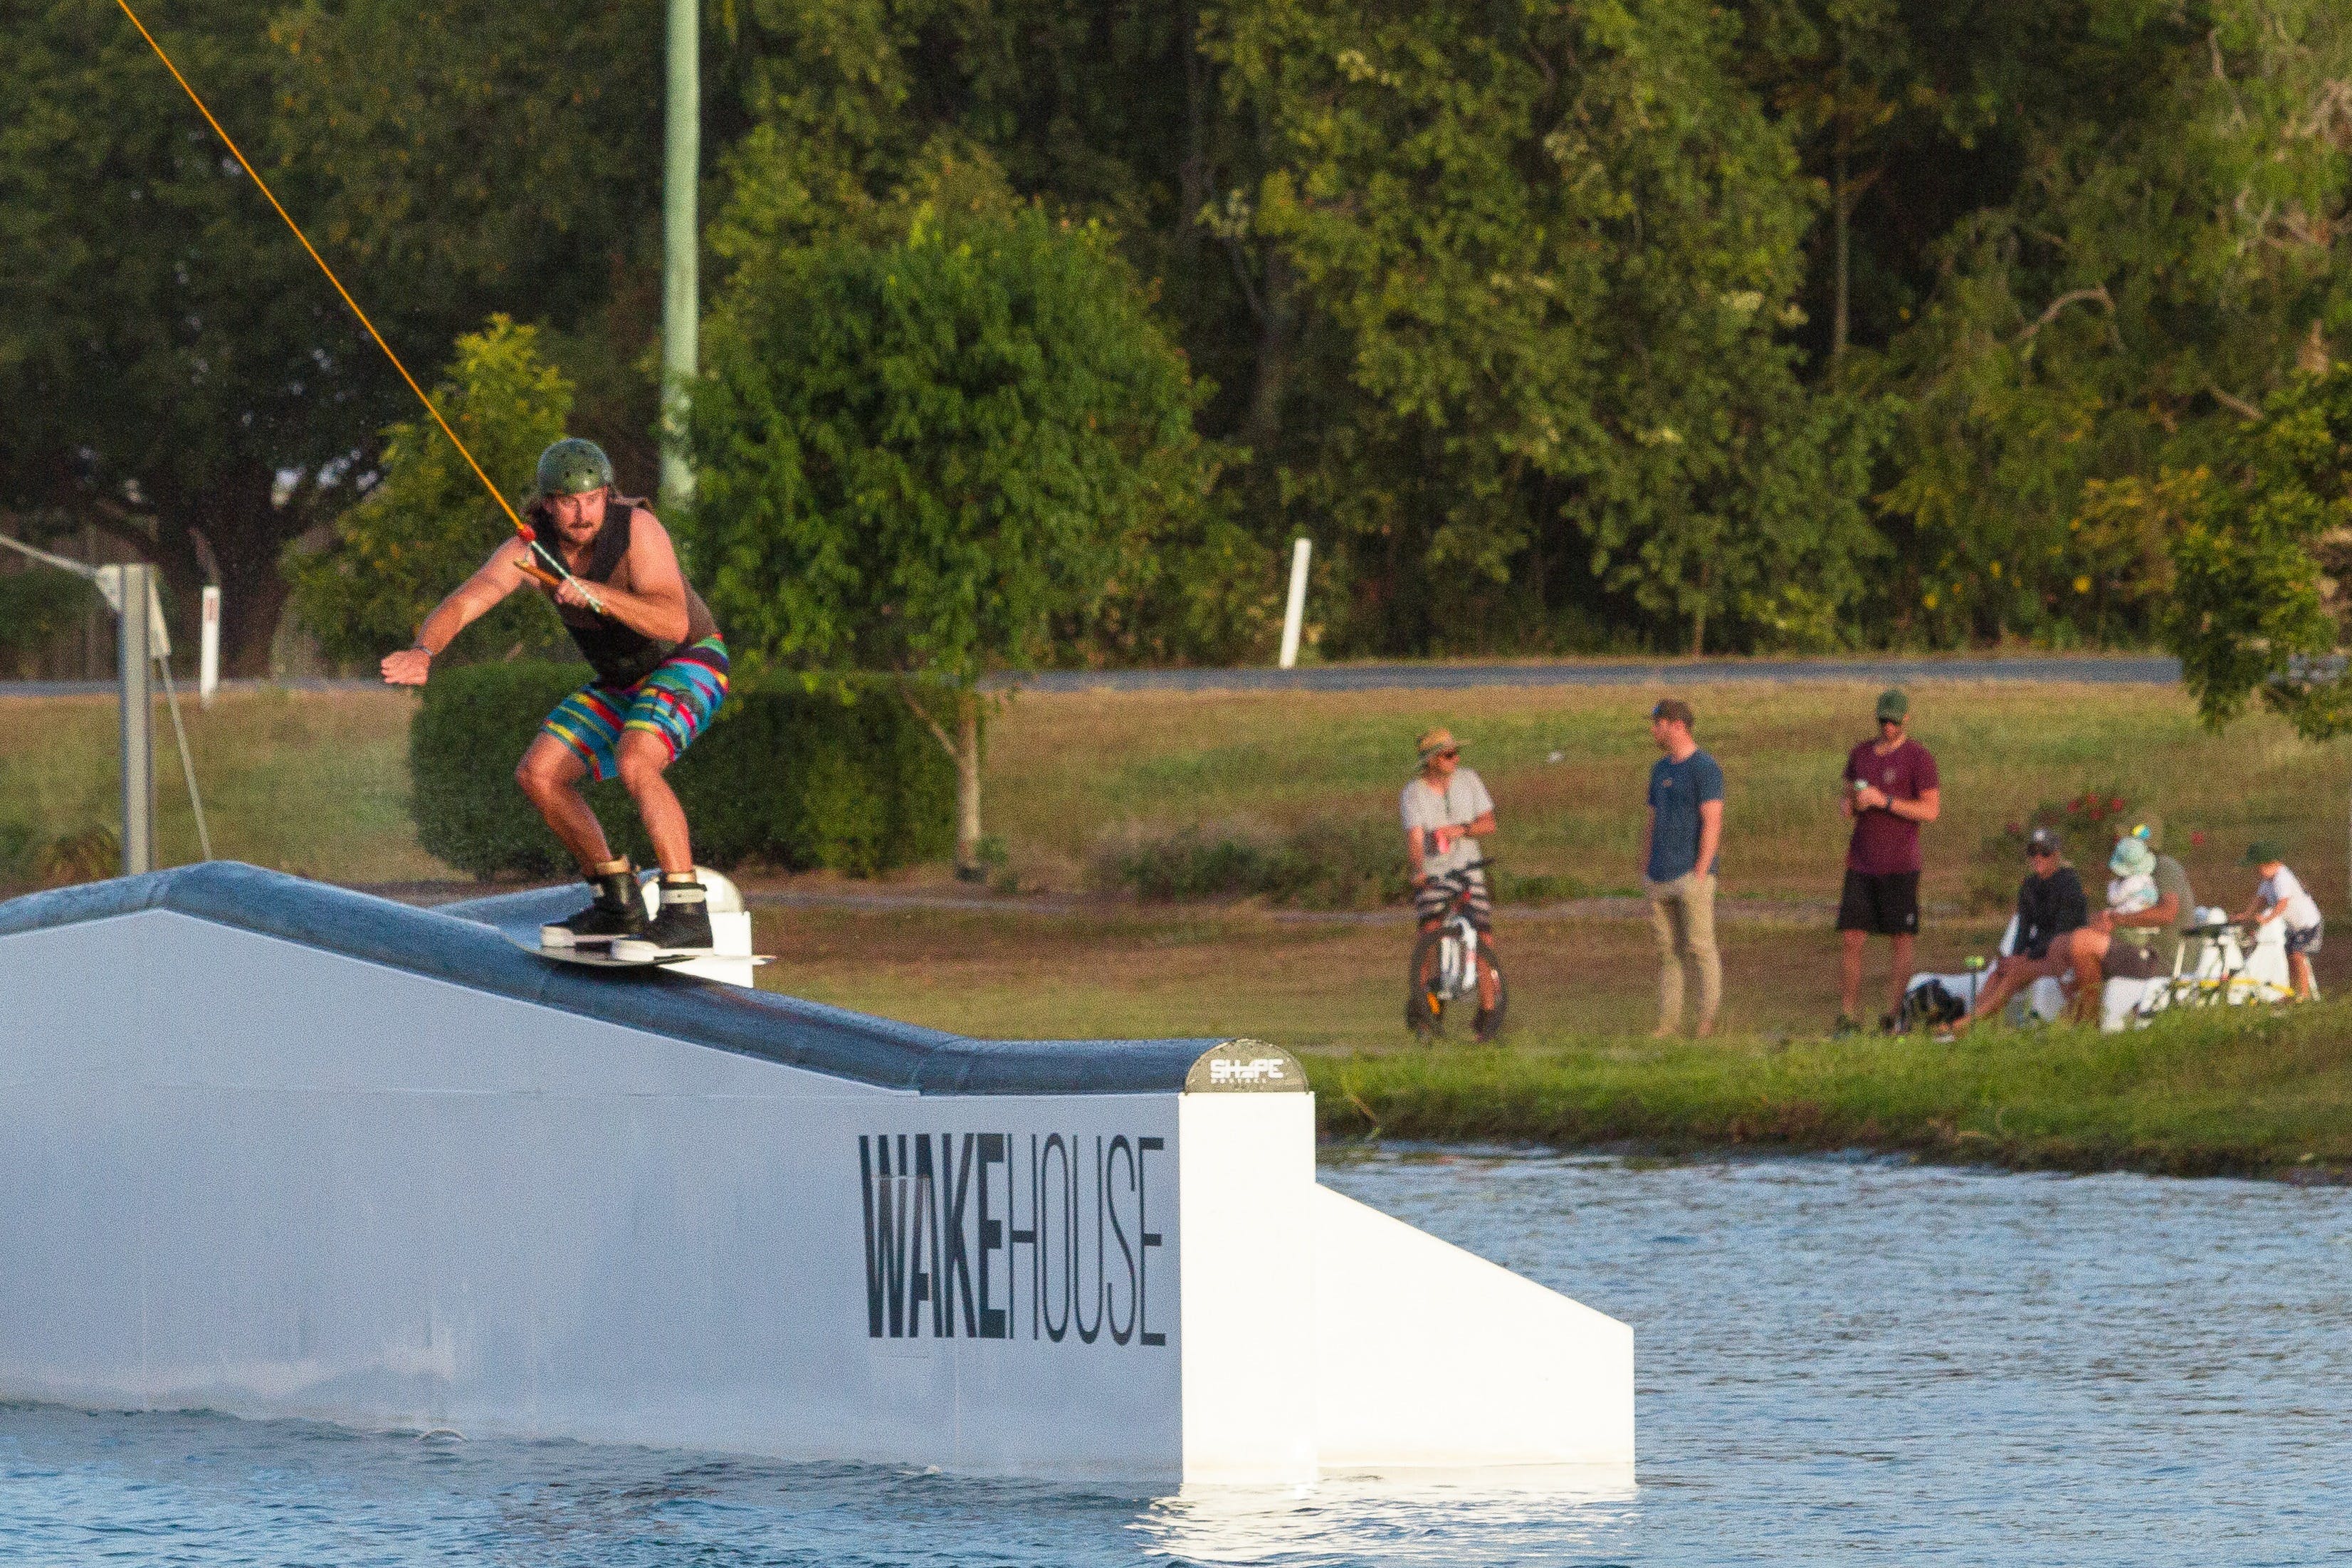 Cash for Tricks - Wakeboarding Comp - Palm Beach Accommodation